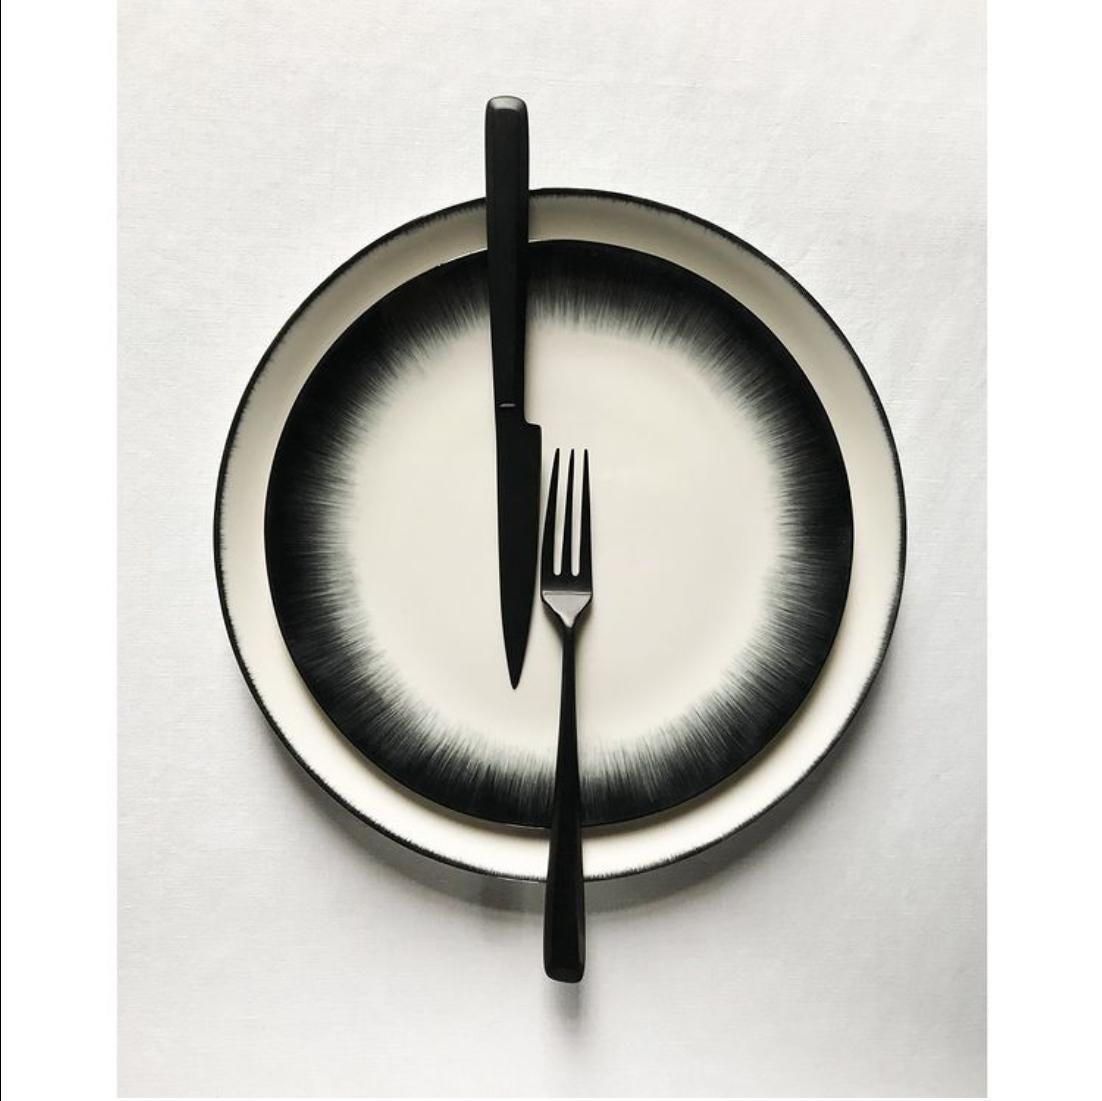 White Ann Demeulemeester for Serax 17.5 cm plates (set of two) For Sale